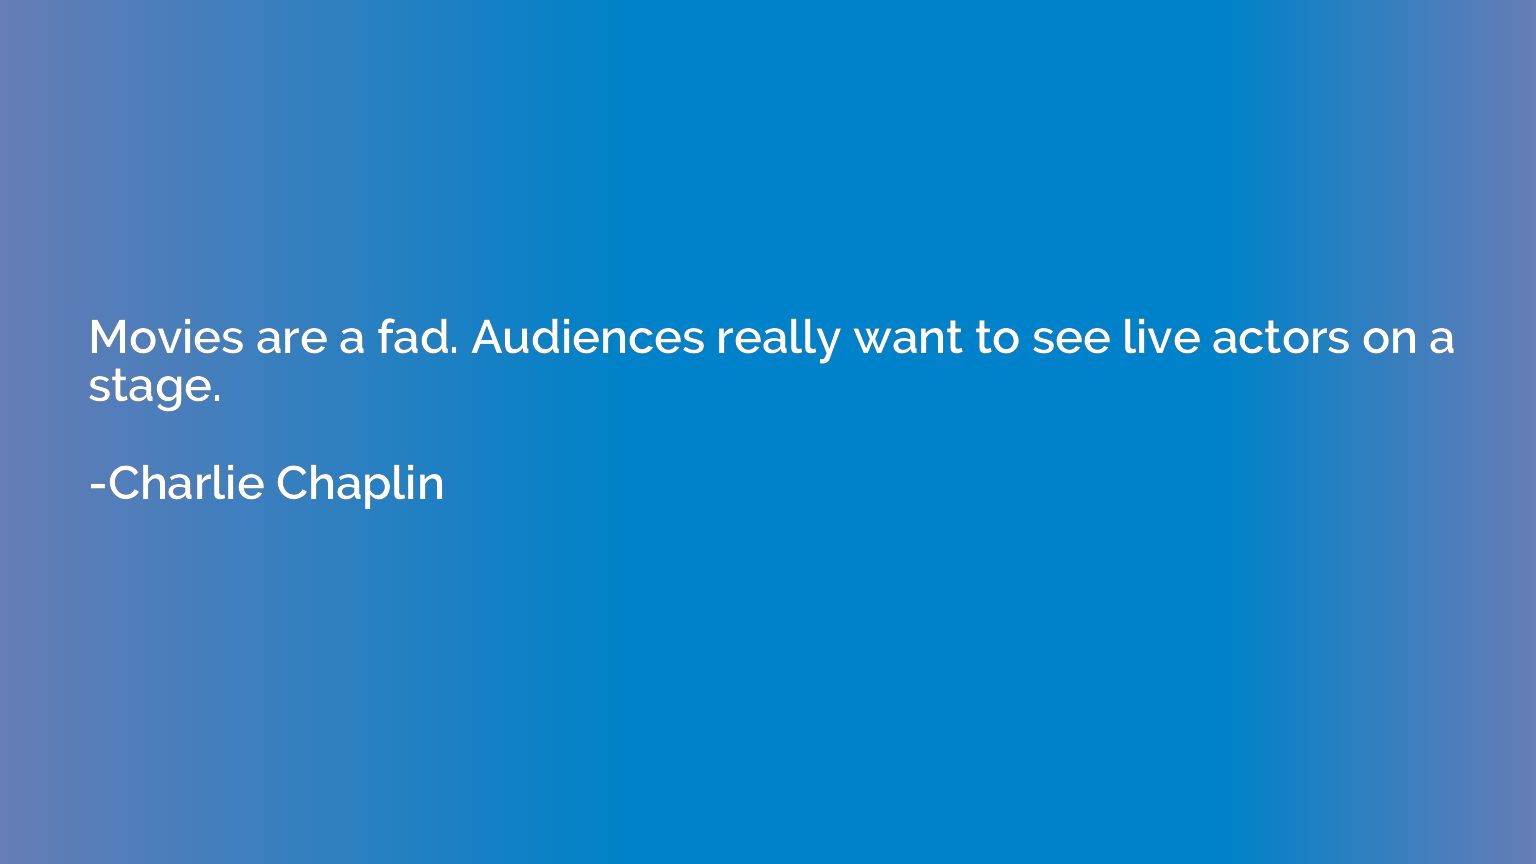 Movies are a fad. Audiences really want to see live actors o